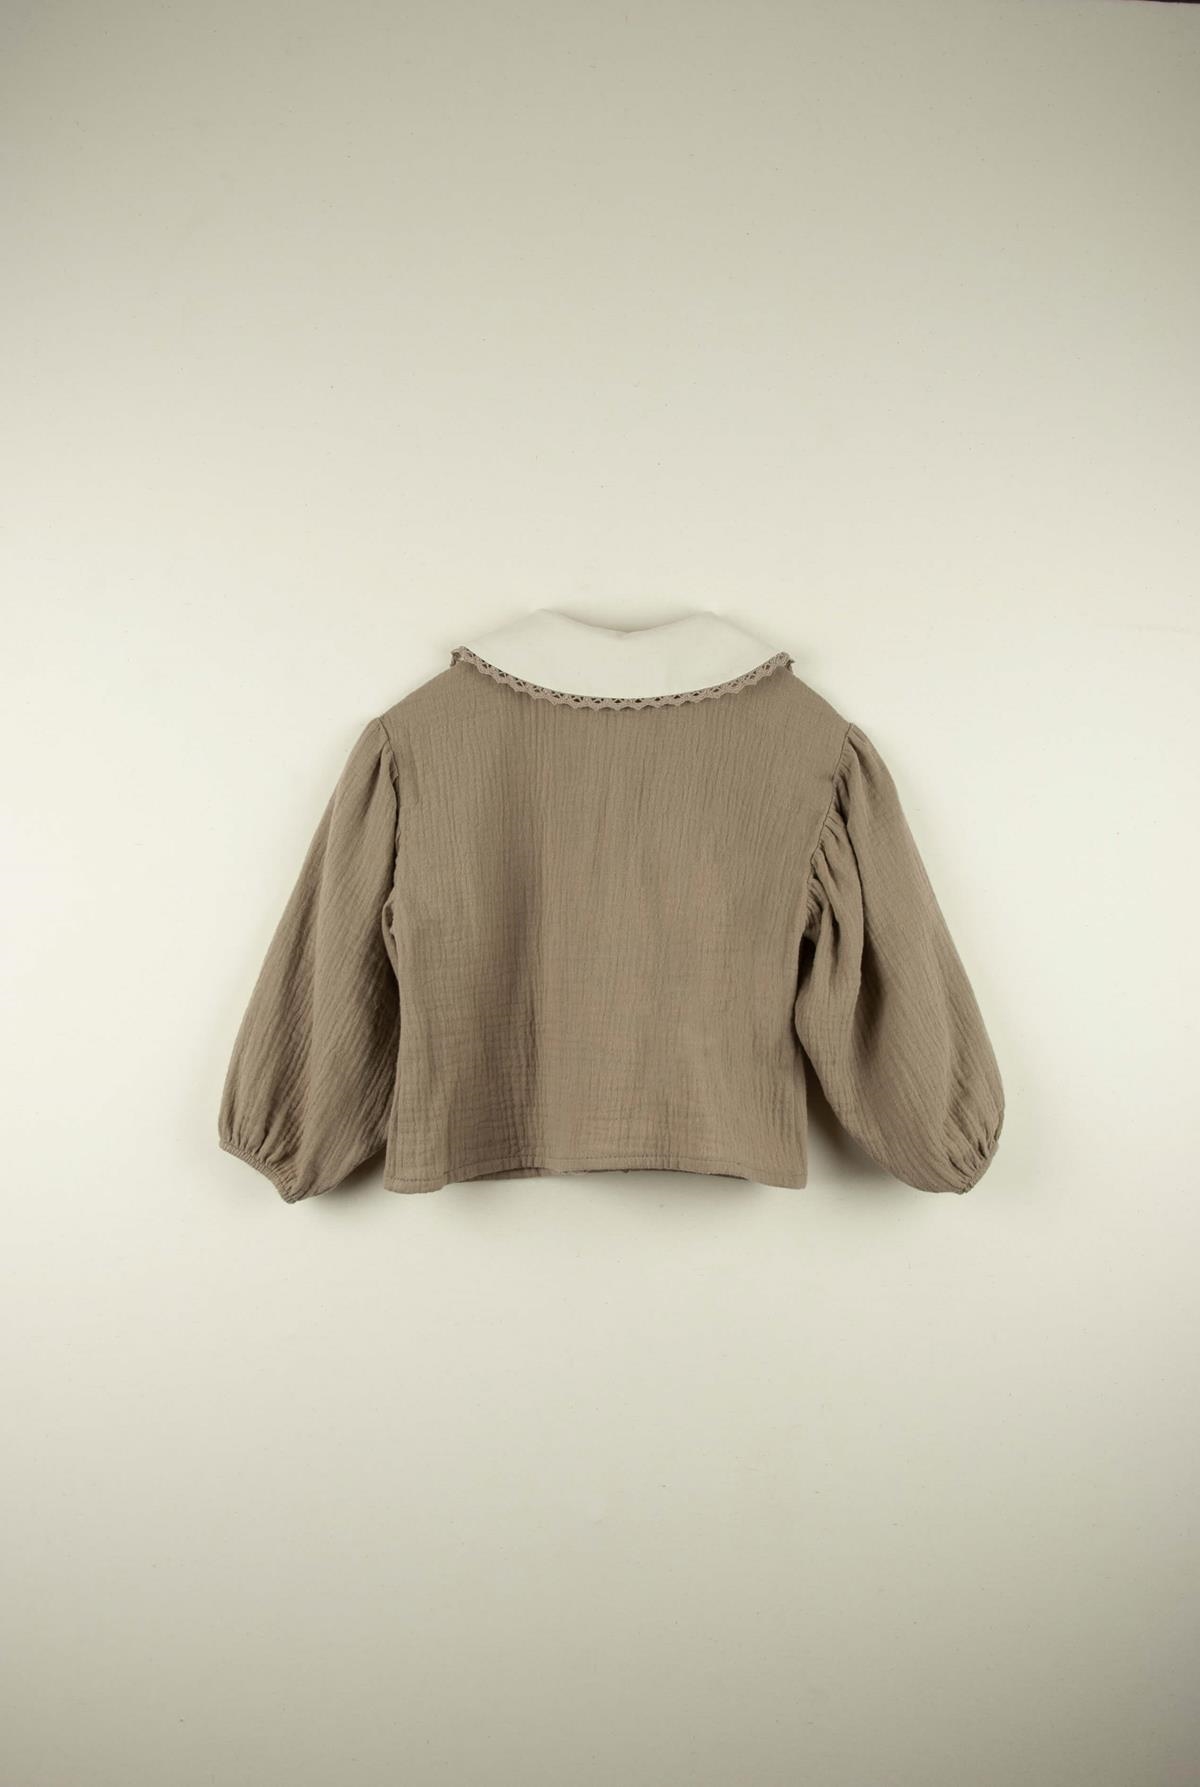 Mod.12.2 Taupe blouse with embroidered neckline | AW21.22 Mod.12.2 Taupe blouse with embroidered neckline | 1